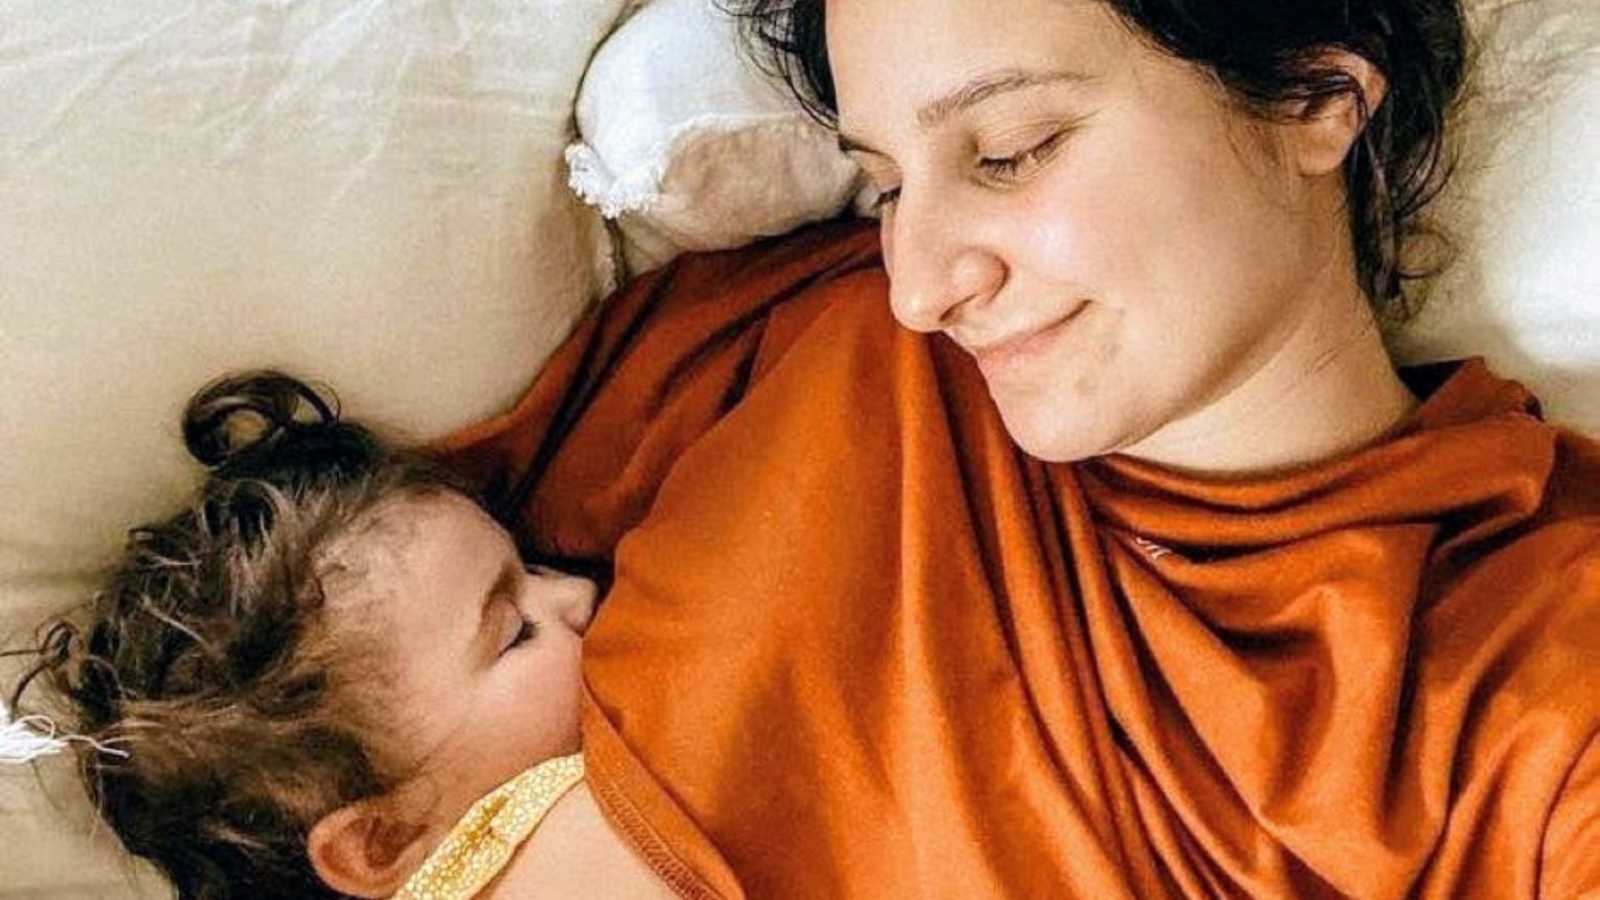 Young mom smiles down at her toddler while she sleeps next to her during an afternoon nap